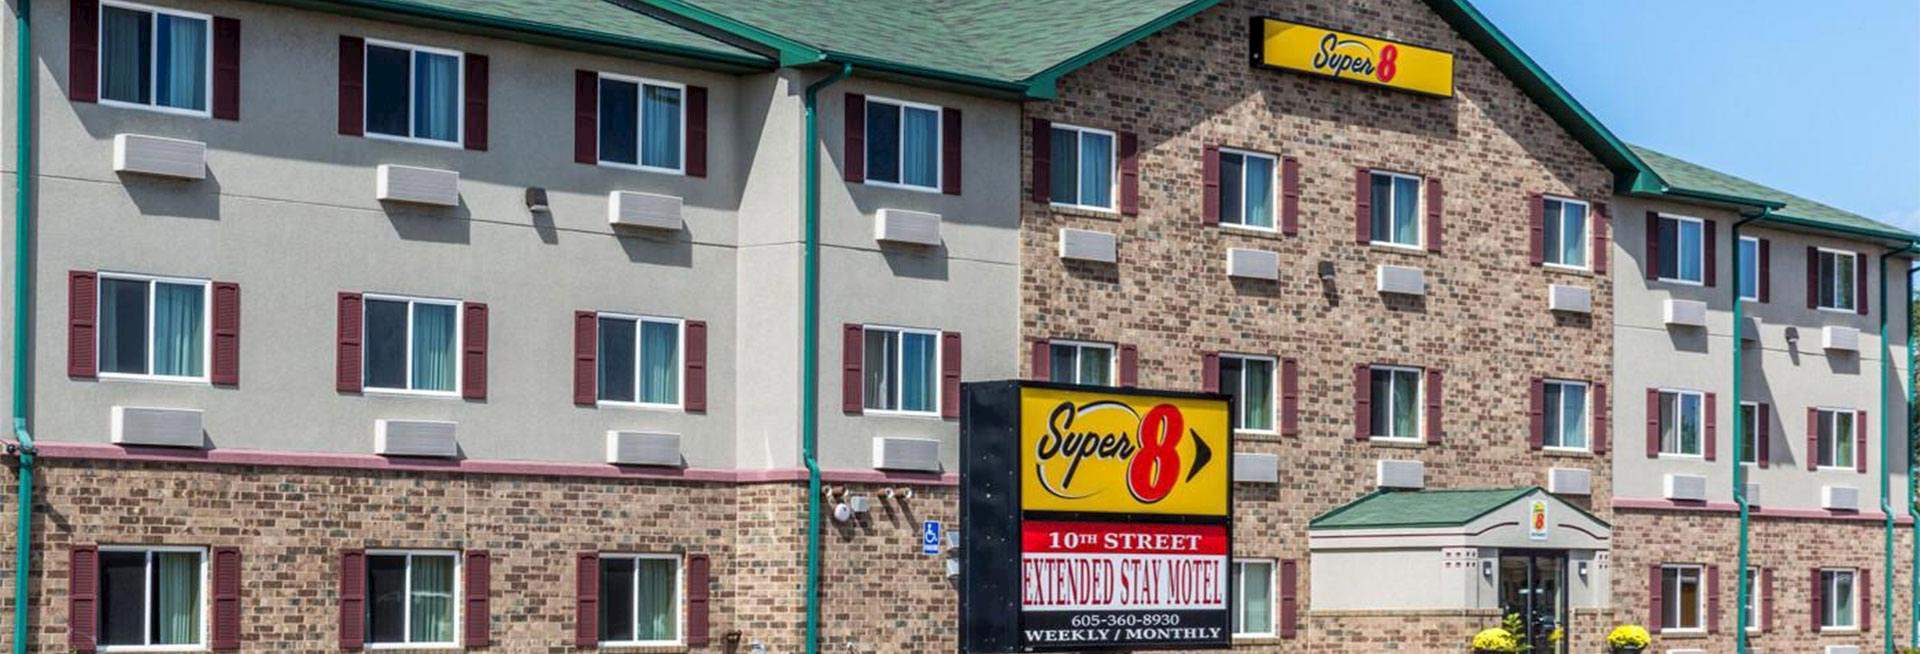 Sioux Falls Hotel Reservations – Super 8 Sioux Falls